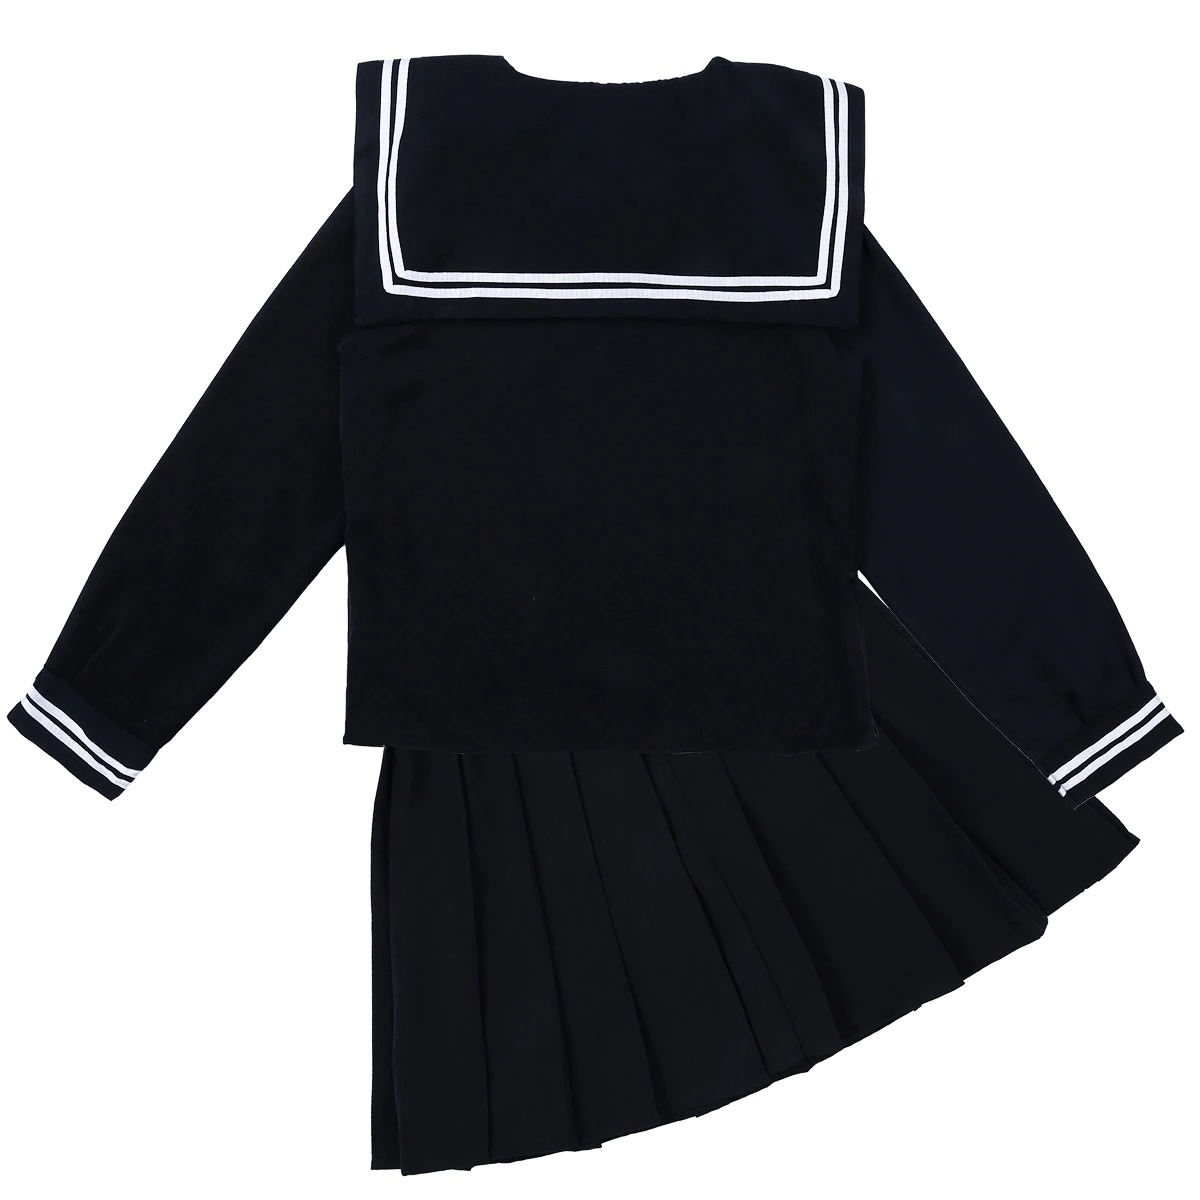 Cosplay Sailor Uniform Costume / Long Sleeve Shirt With Pleated Skirt And Neckerchief - EVE's SECRETS